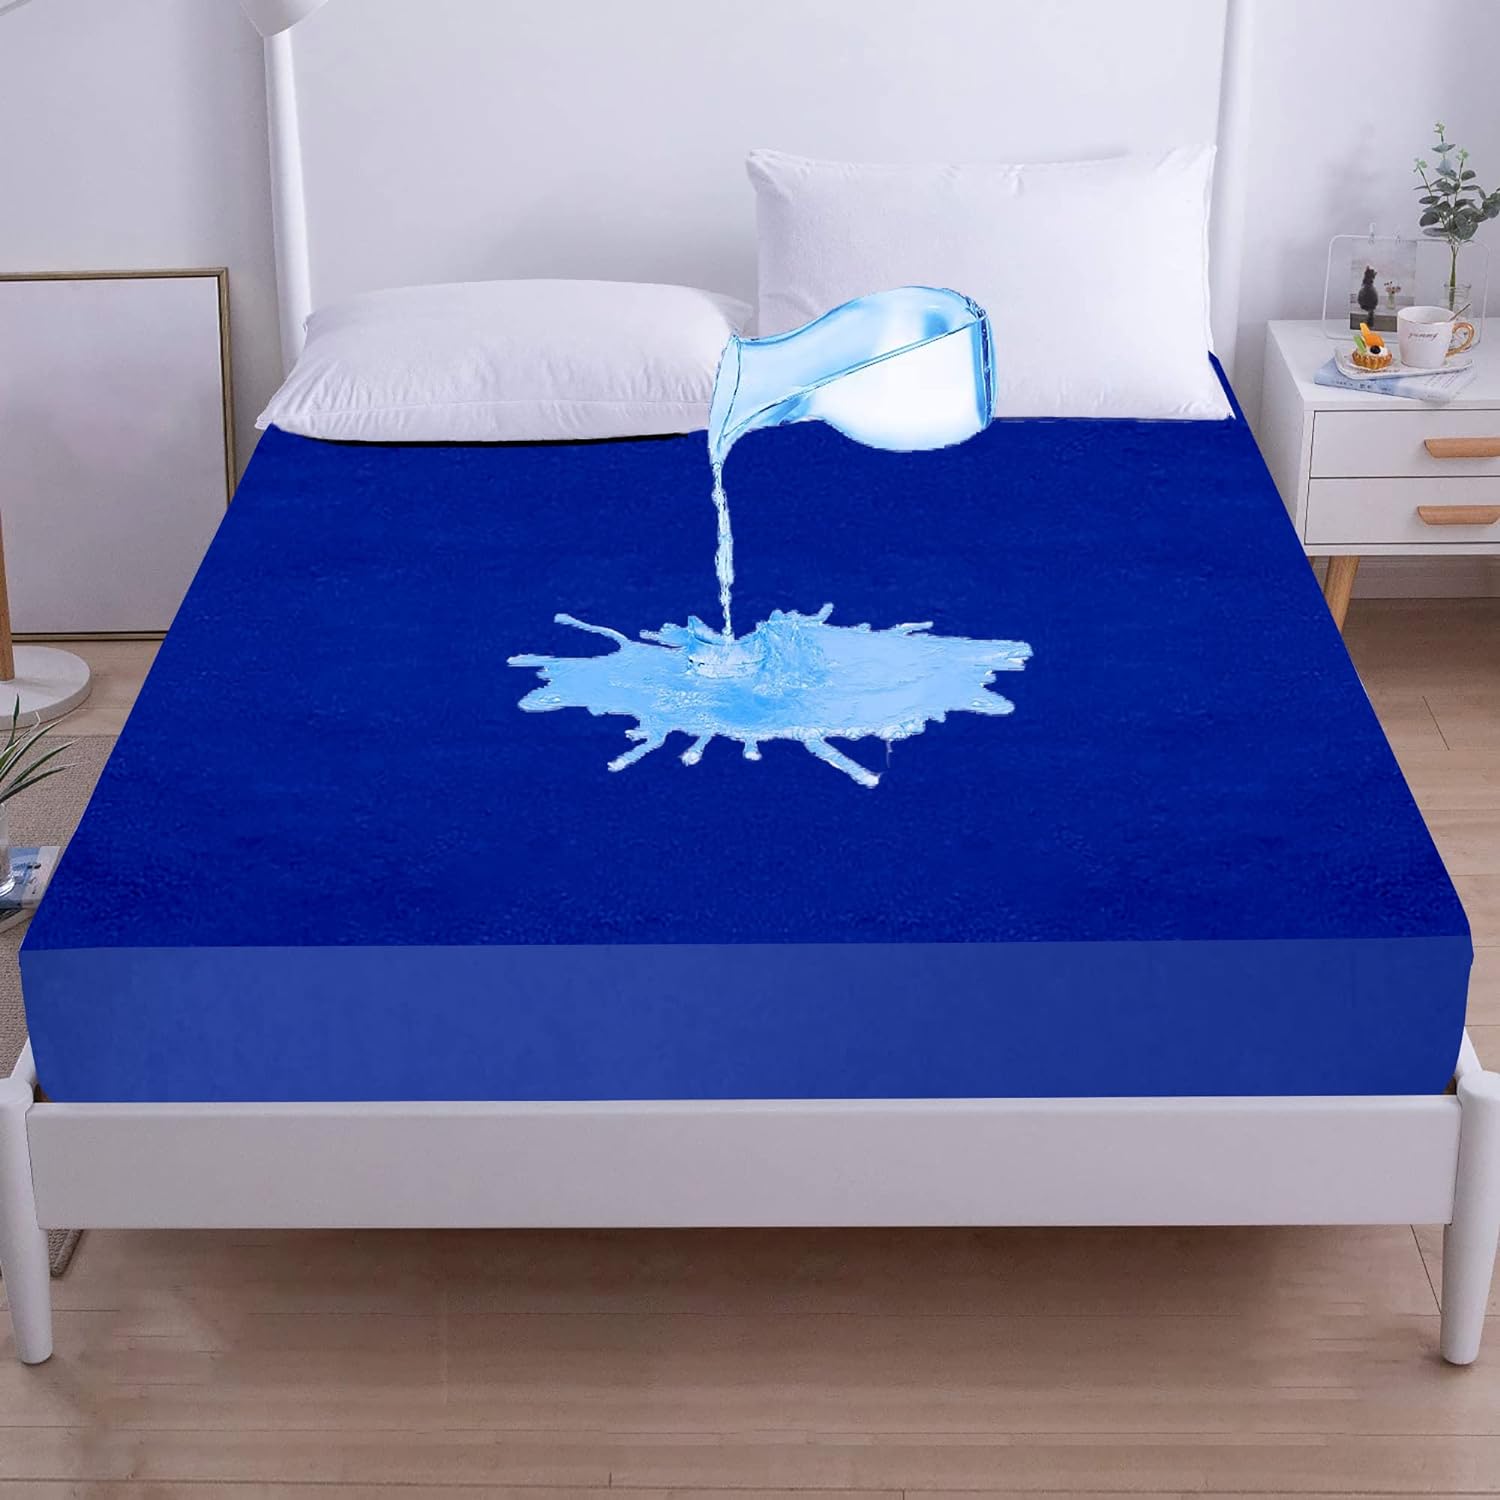 Soft and comfortable bed protector